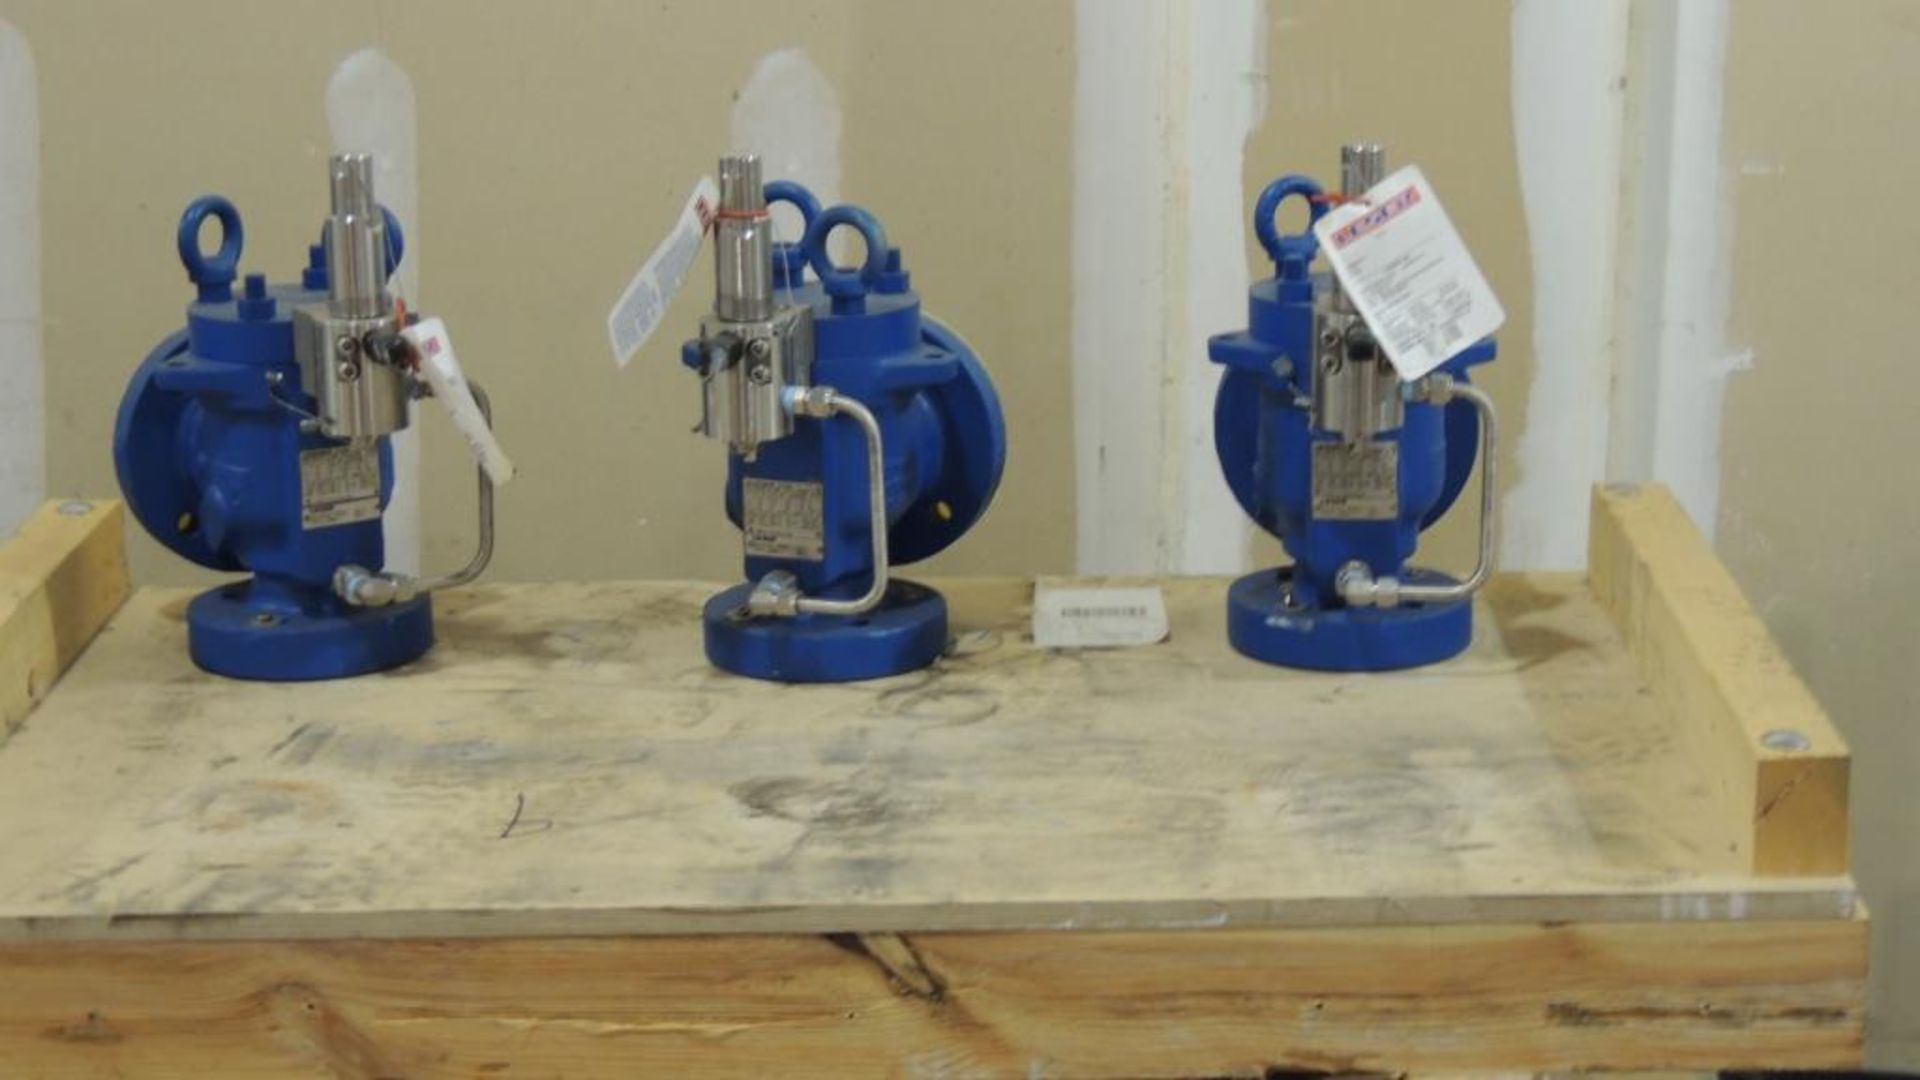 Large Quantity of Leser Relief and Safety Valves, plus Spare Parts Kits - Image 369 of 374